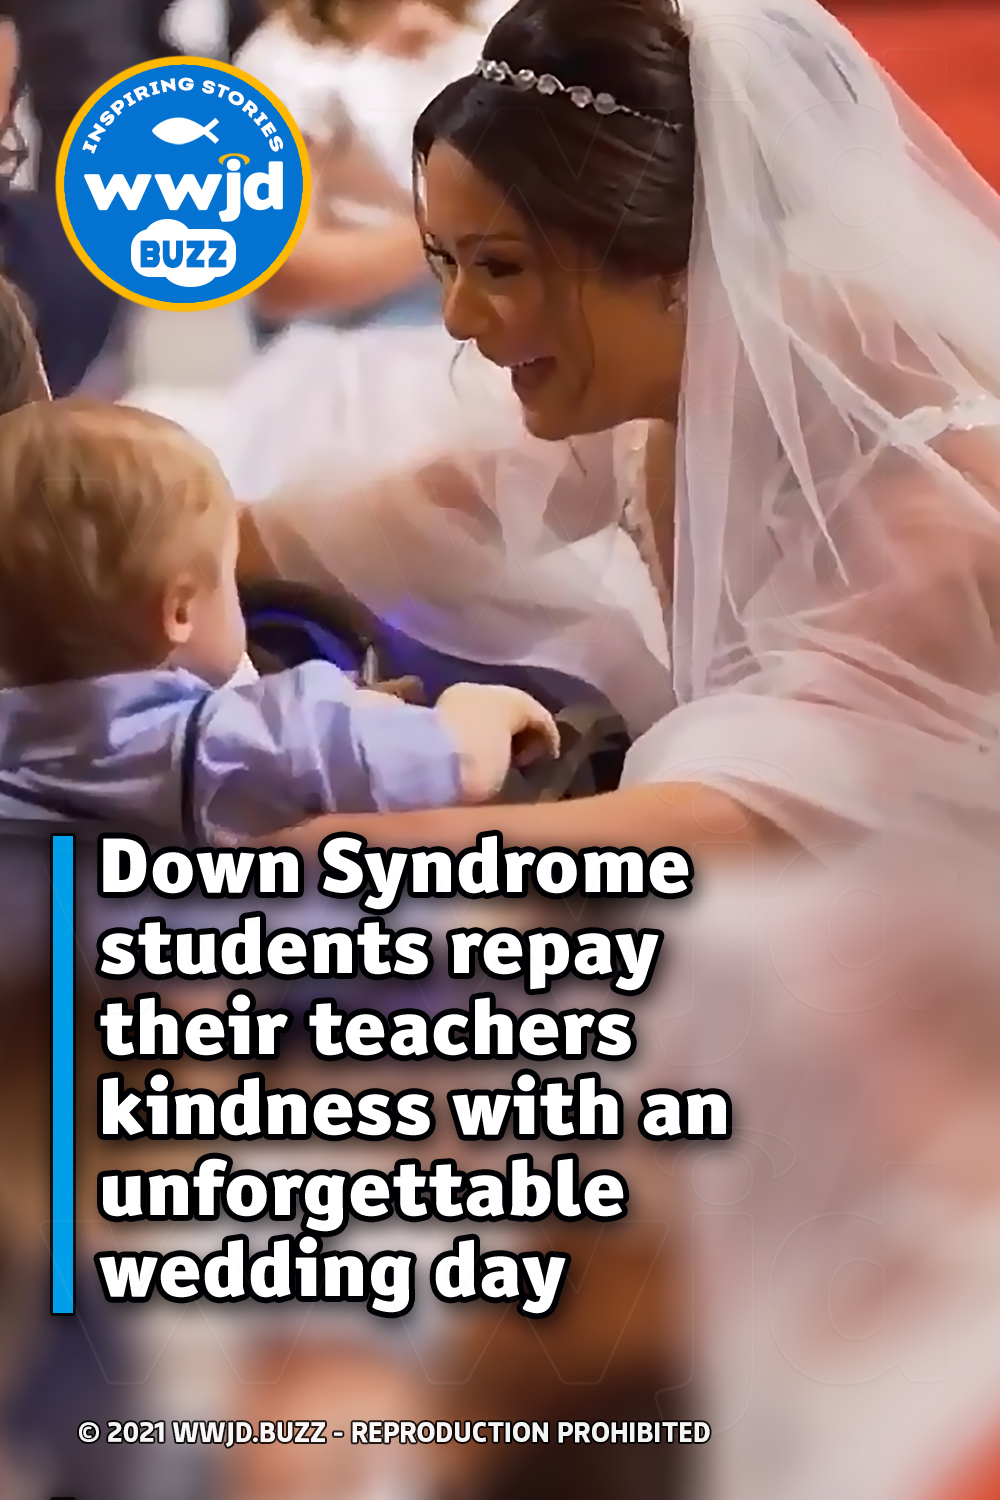 Down Syndrome students repay their teachers kindness with an unforgettable wedding day gesture